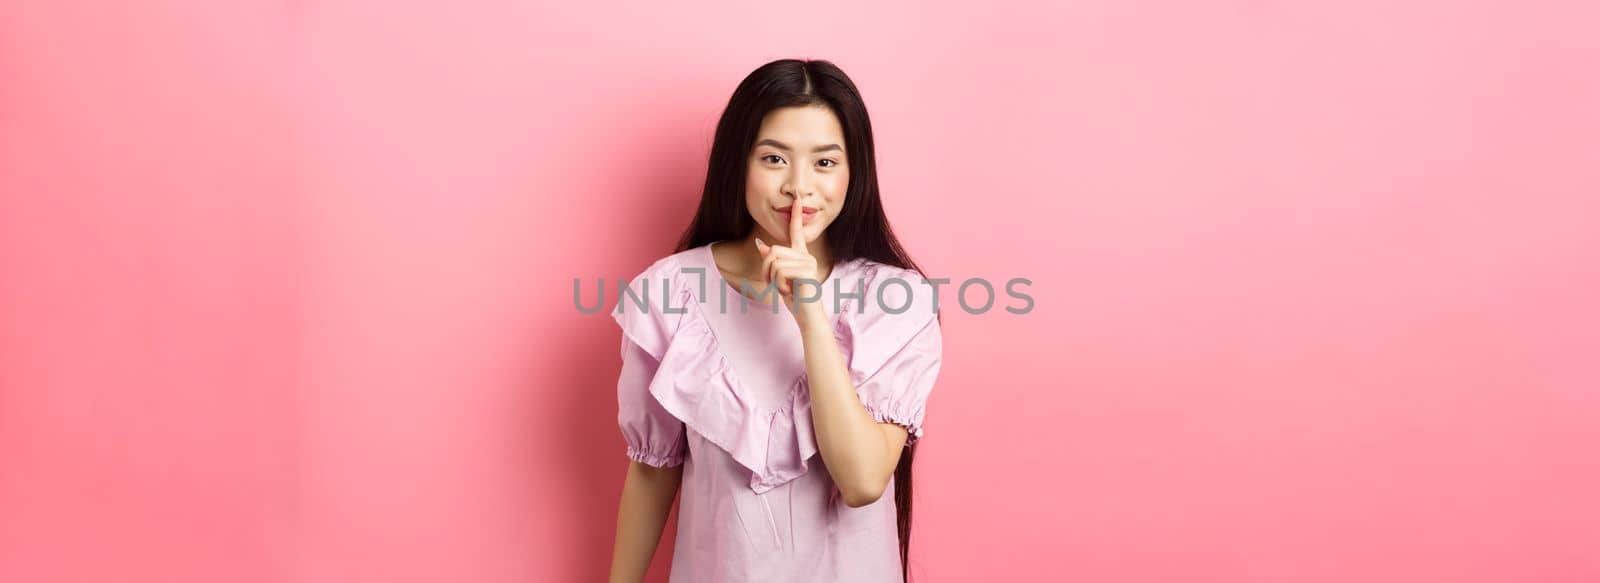 Cute asian girl hiding secret, hushing with finger pressed to lips and smiling, asking to keep quiet, standing in dress on pink background.